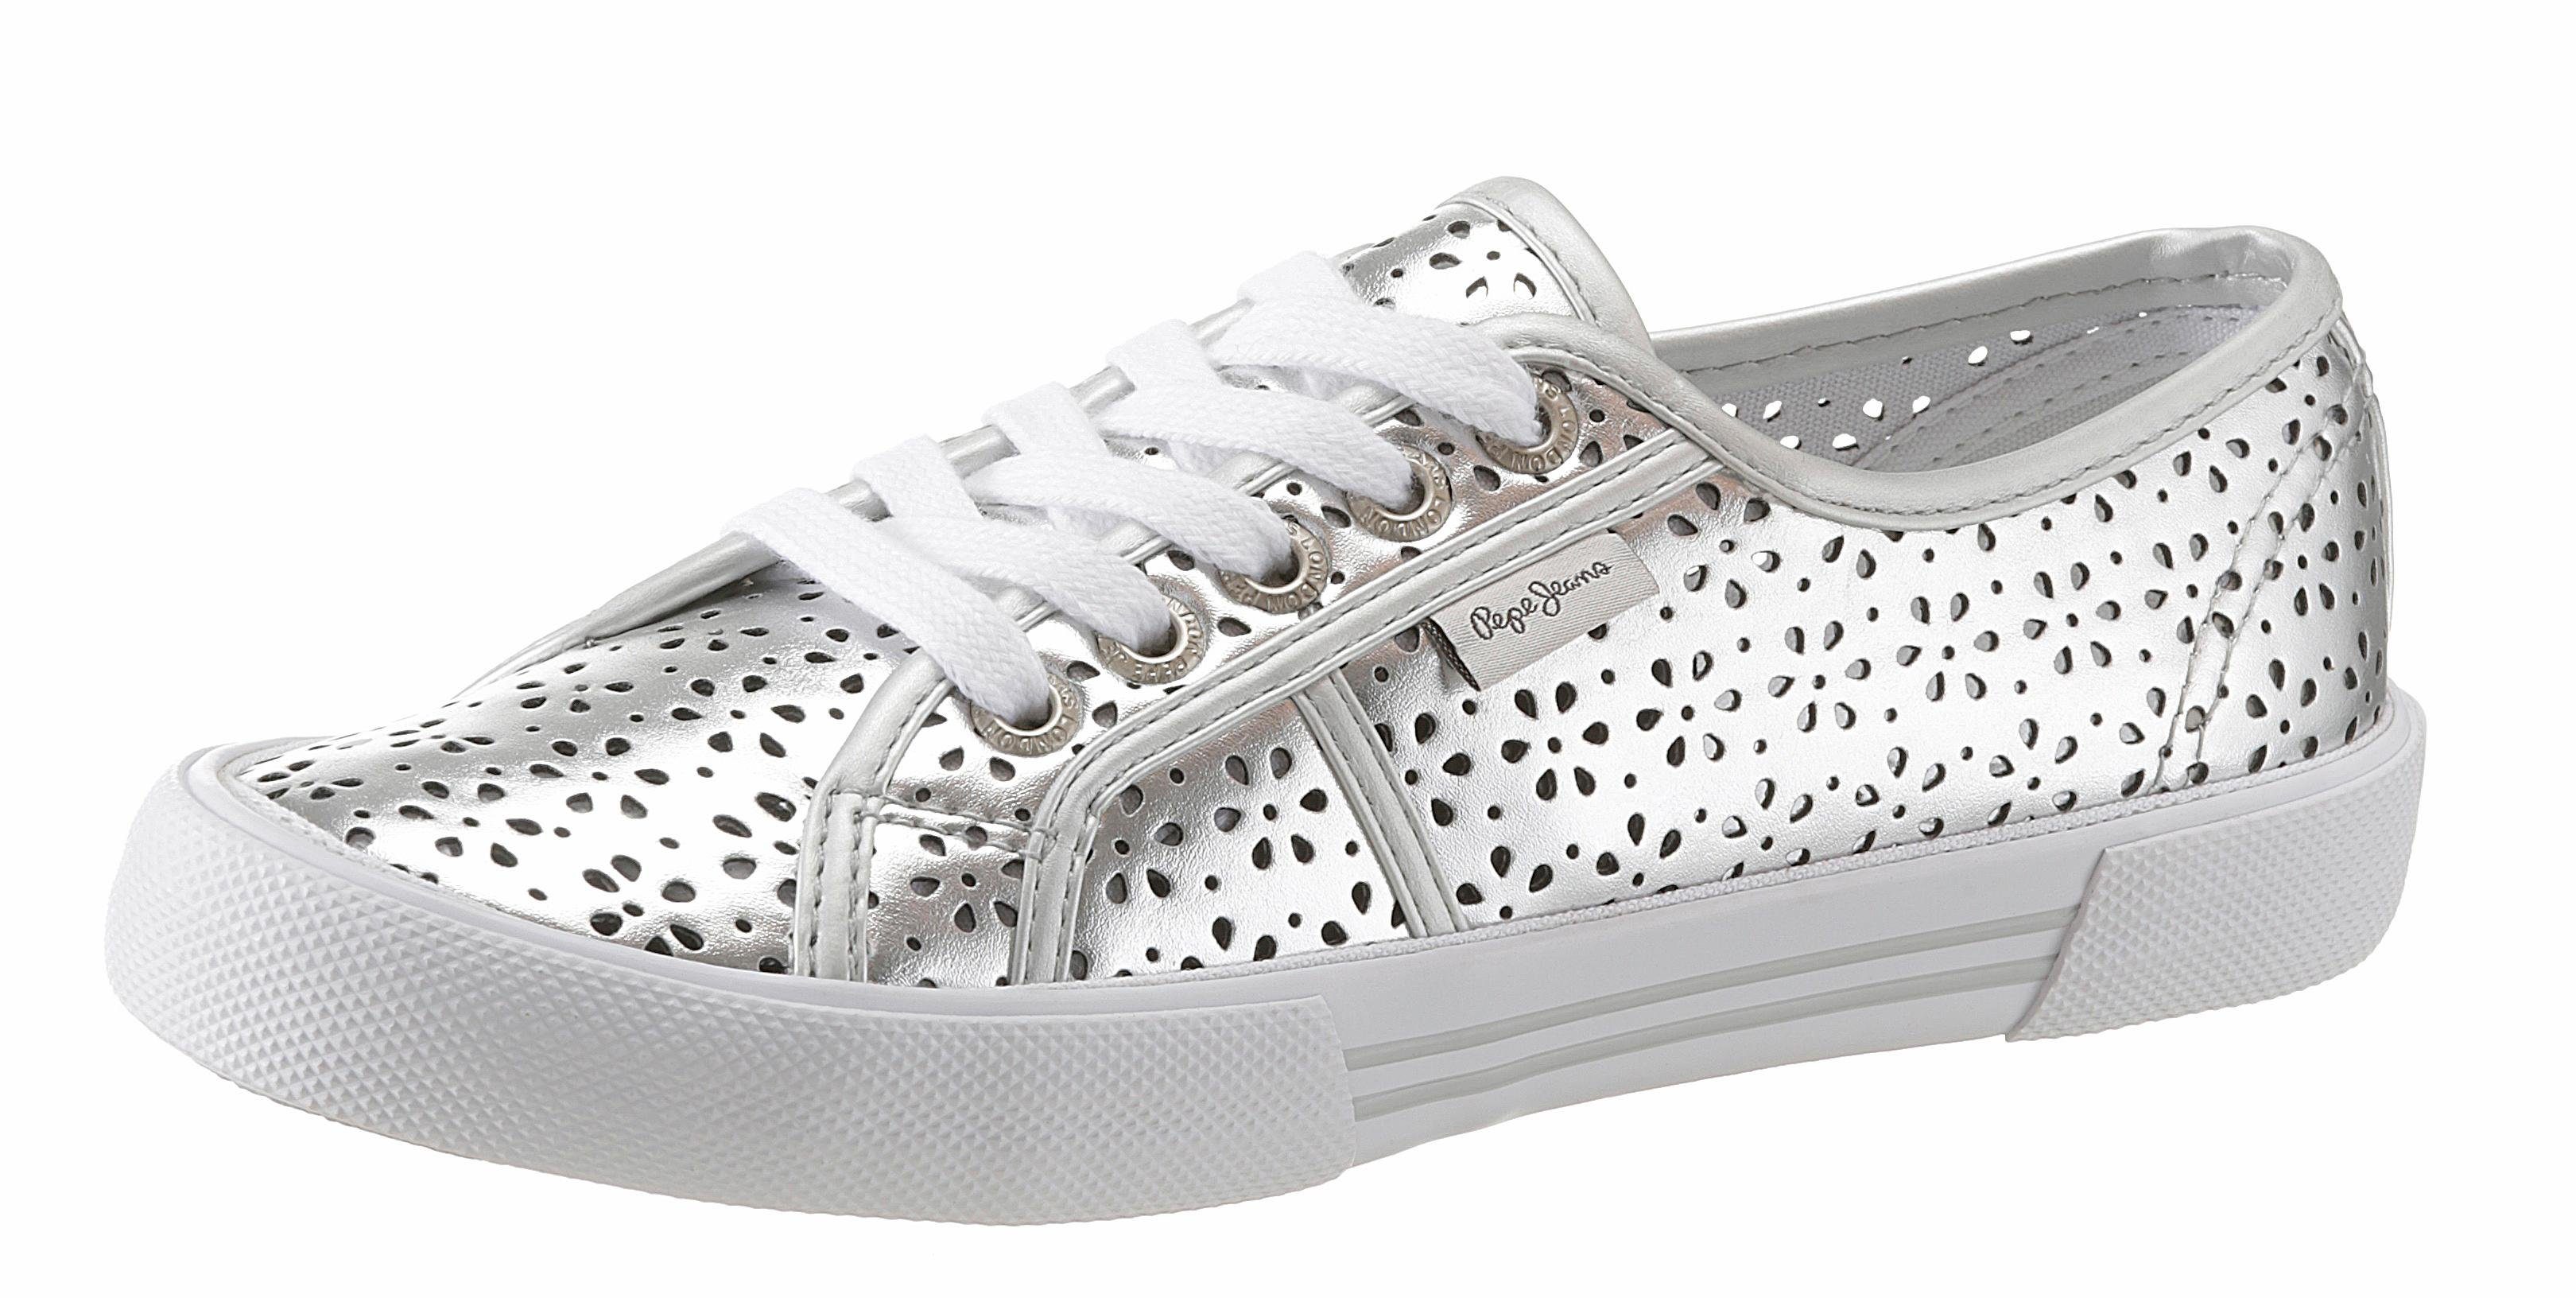 Otto - Pepe Jeans NU 15% KORTING: Pepe Jeans sneakers ABERLADY DAISY